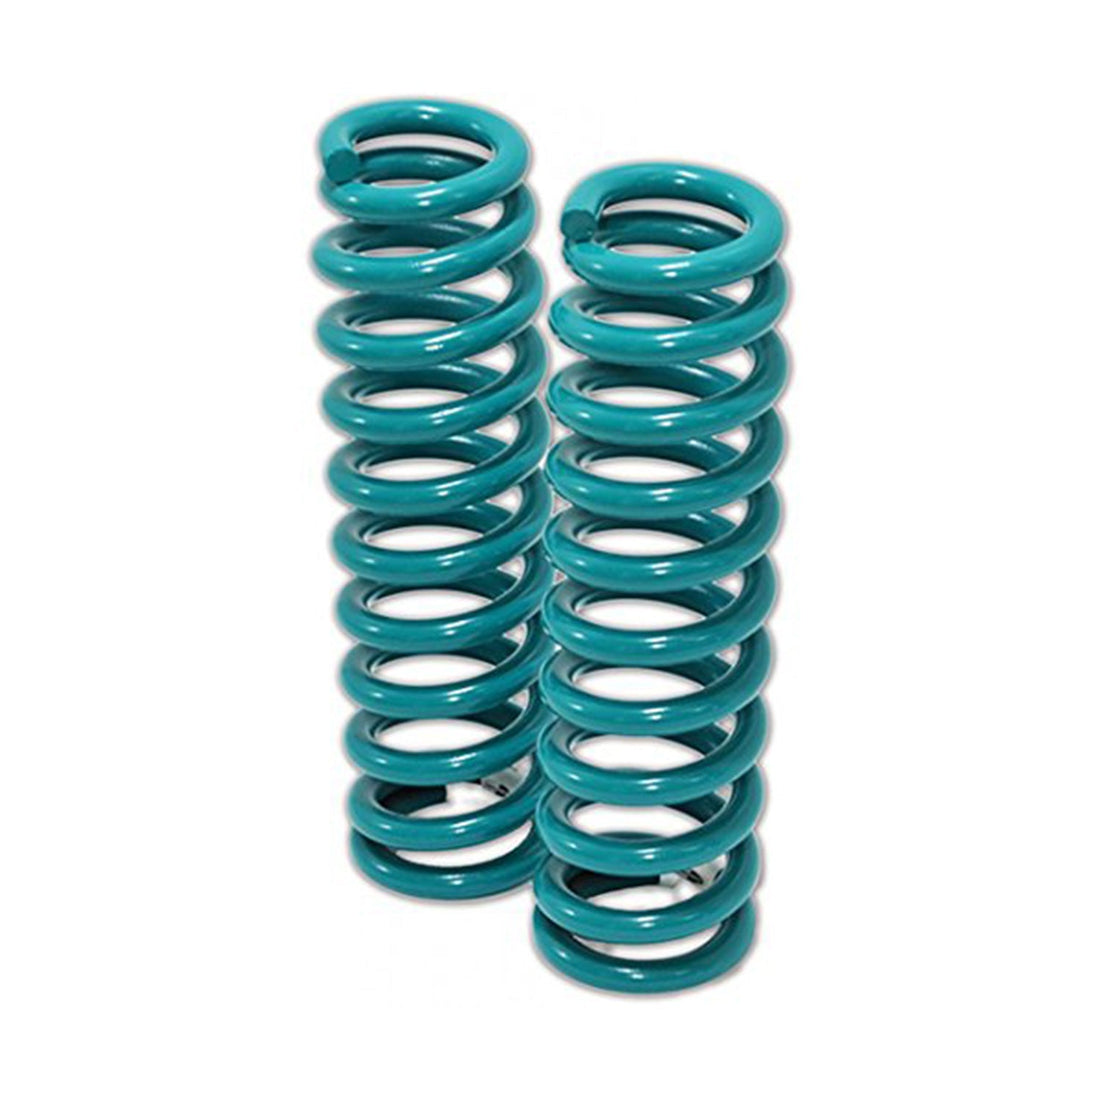 Dobinsons Rear standard height Coil Springs for Toyota 4x4 SUV's multiple (C59-291)